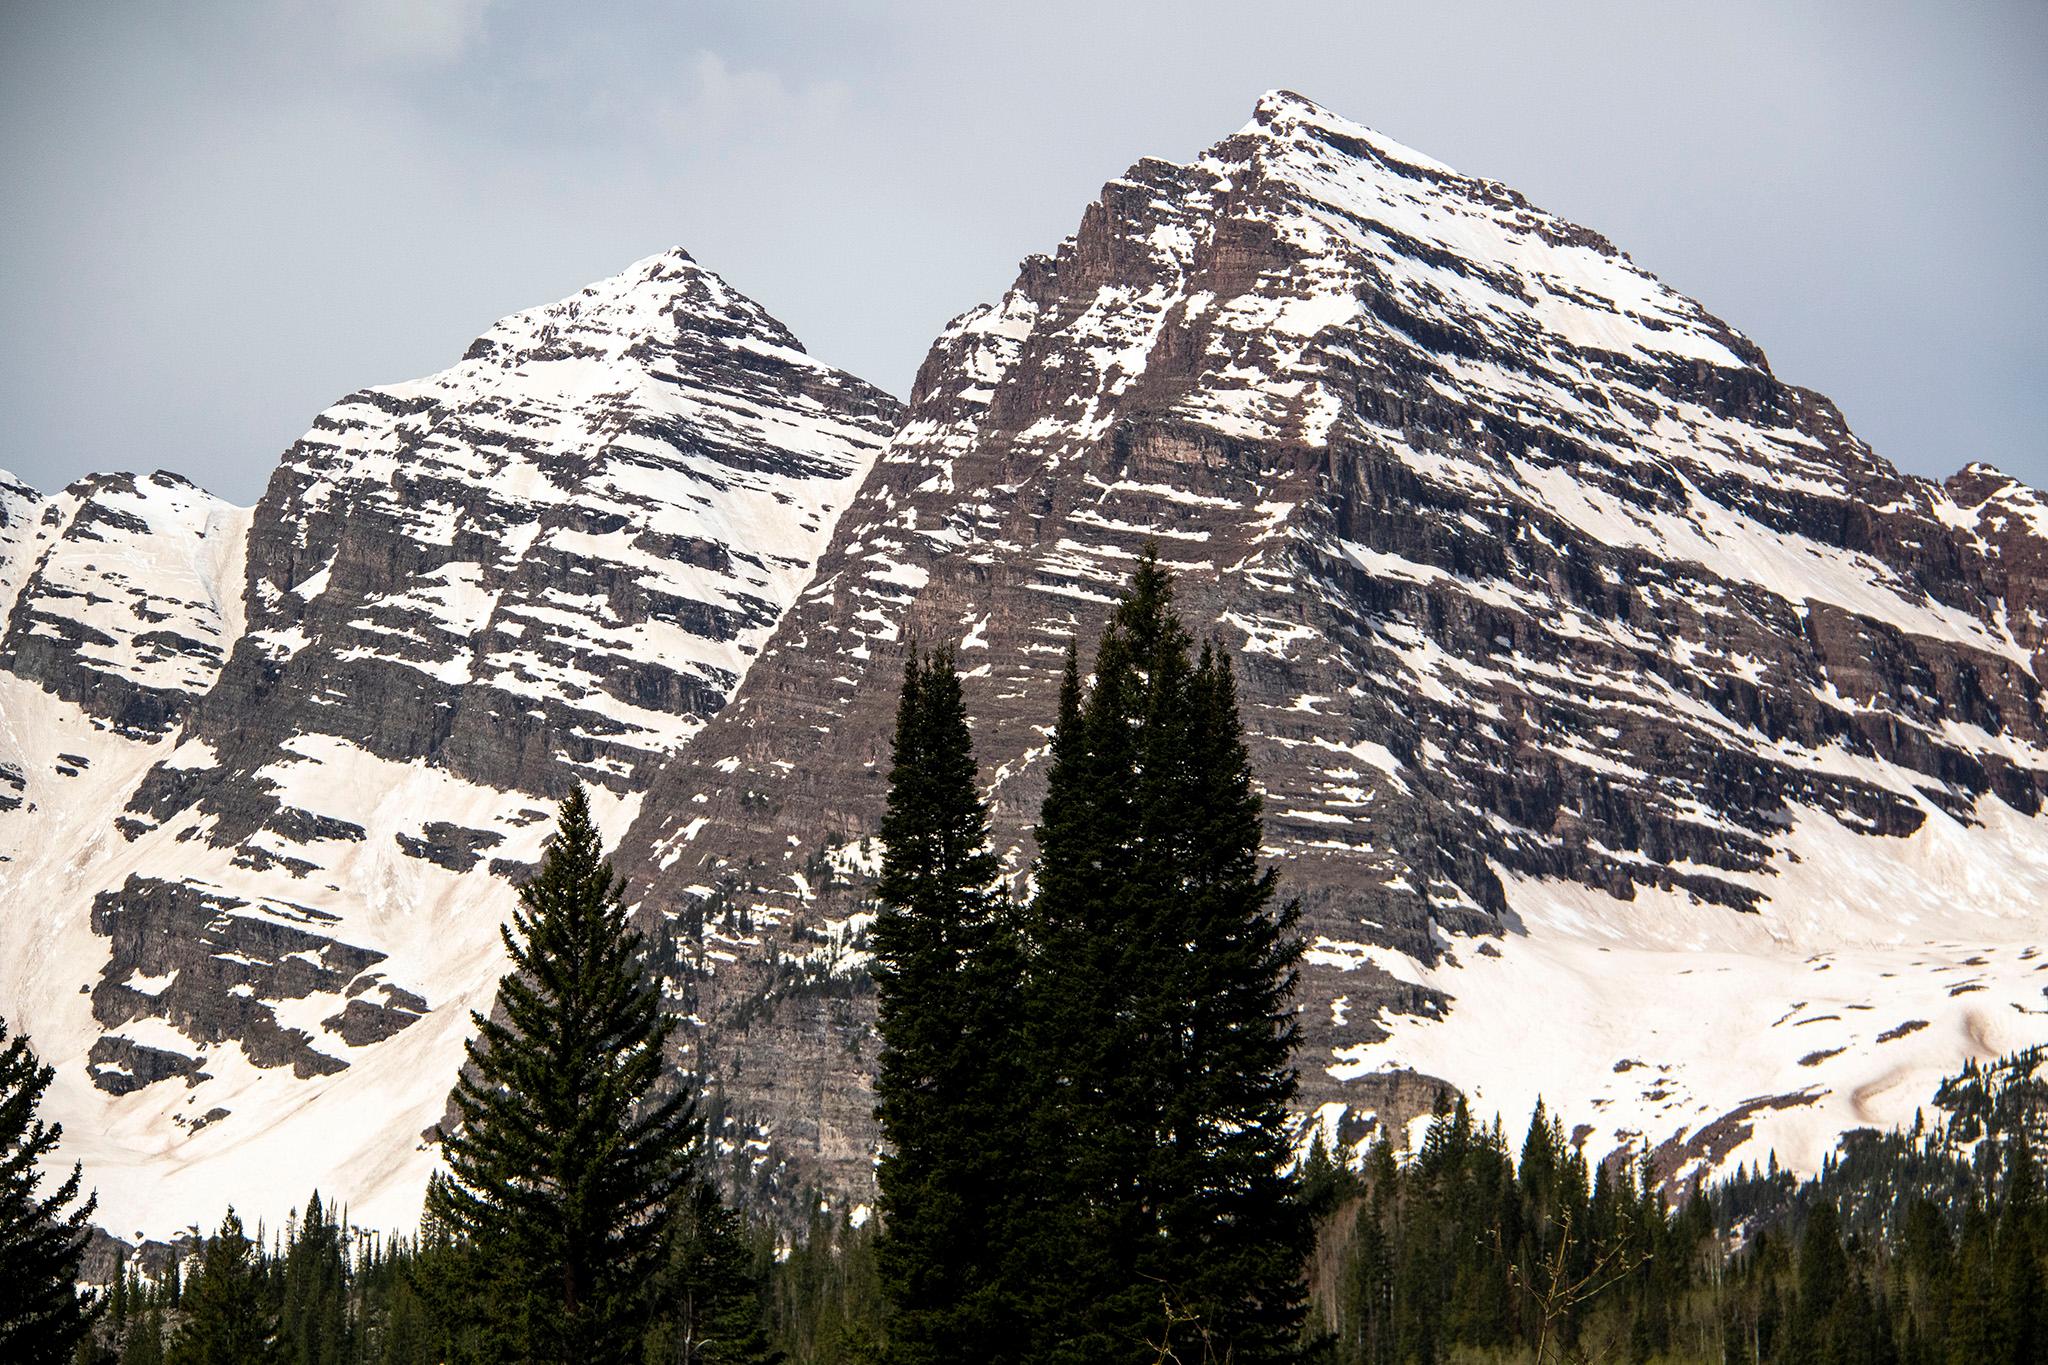 The Maroon Bells in White River National Forest outside of Aspen. May 28, 2022.